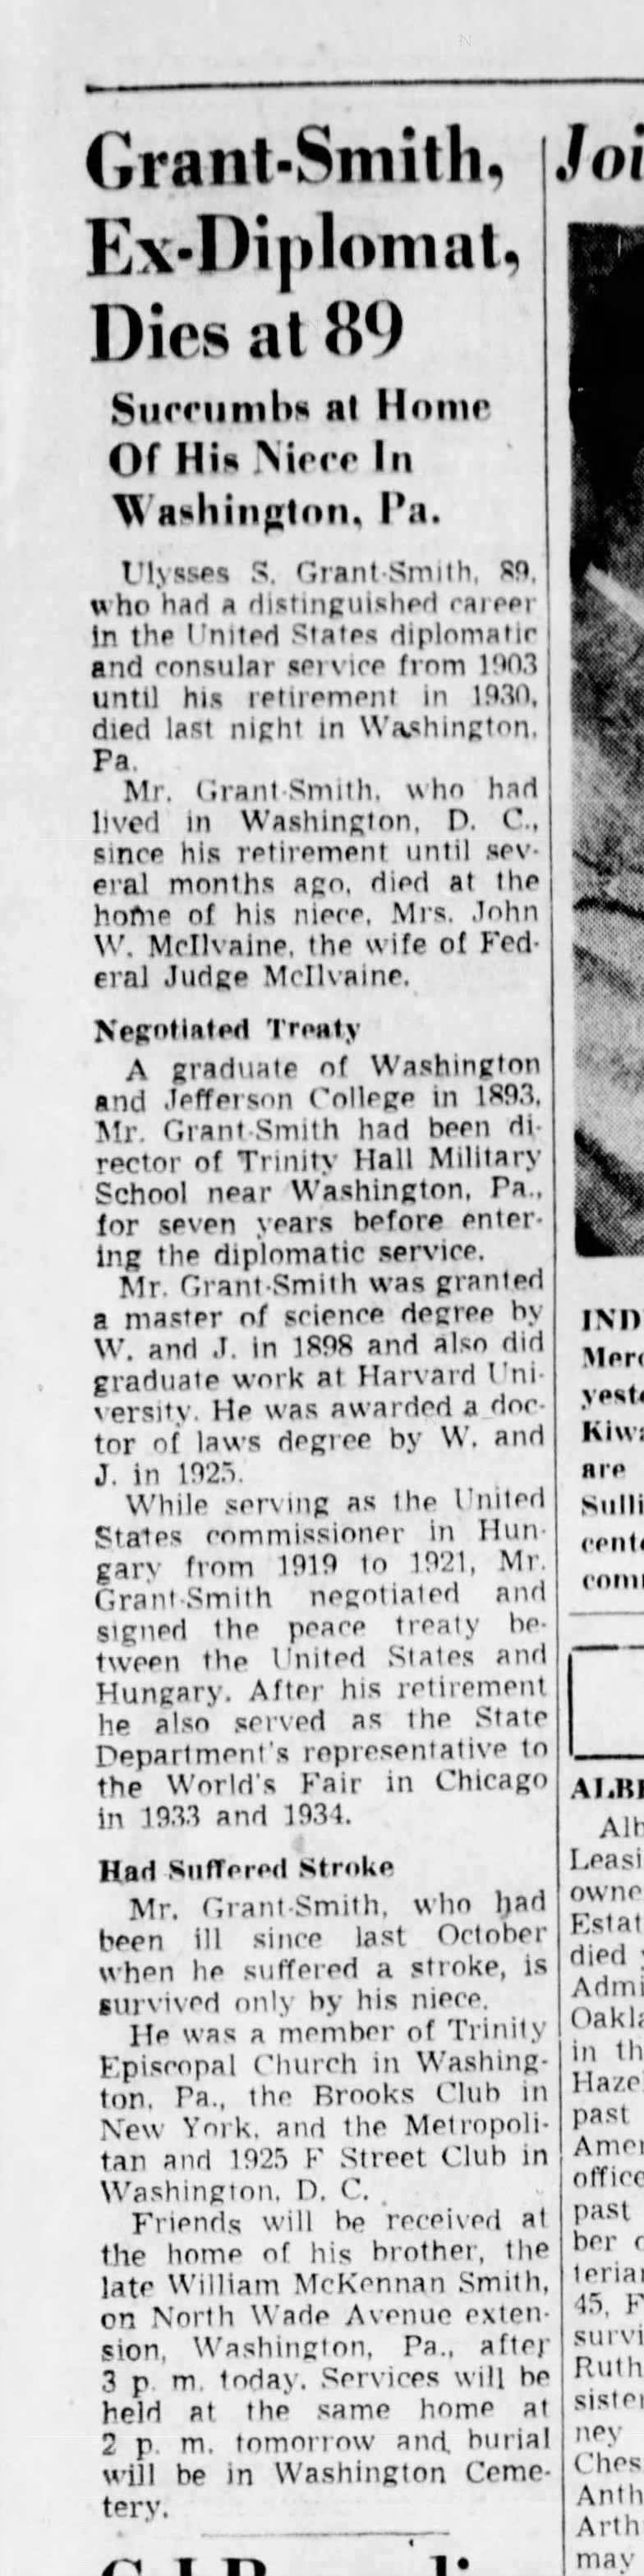 Grant-Smith, Ex-Diplomat, Dies at 89: Succumbs at Home Of His Niece In Washington, Pa.